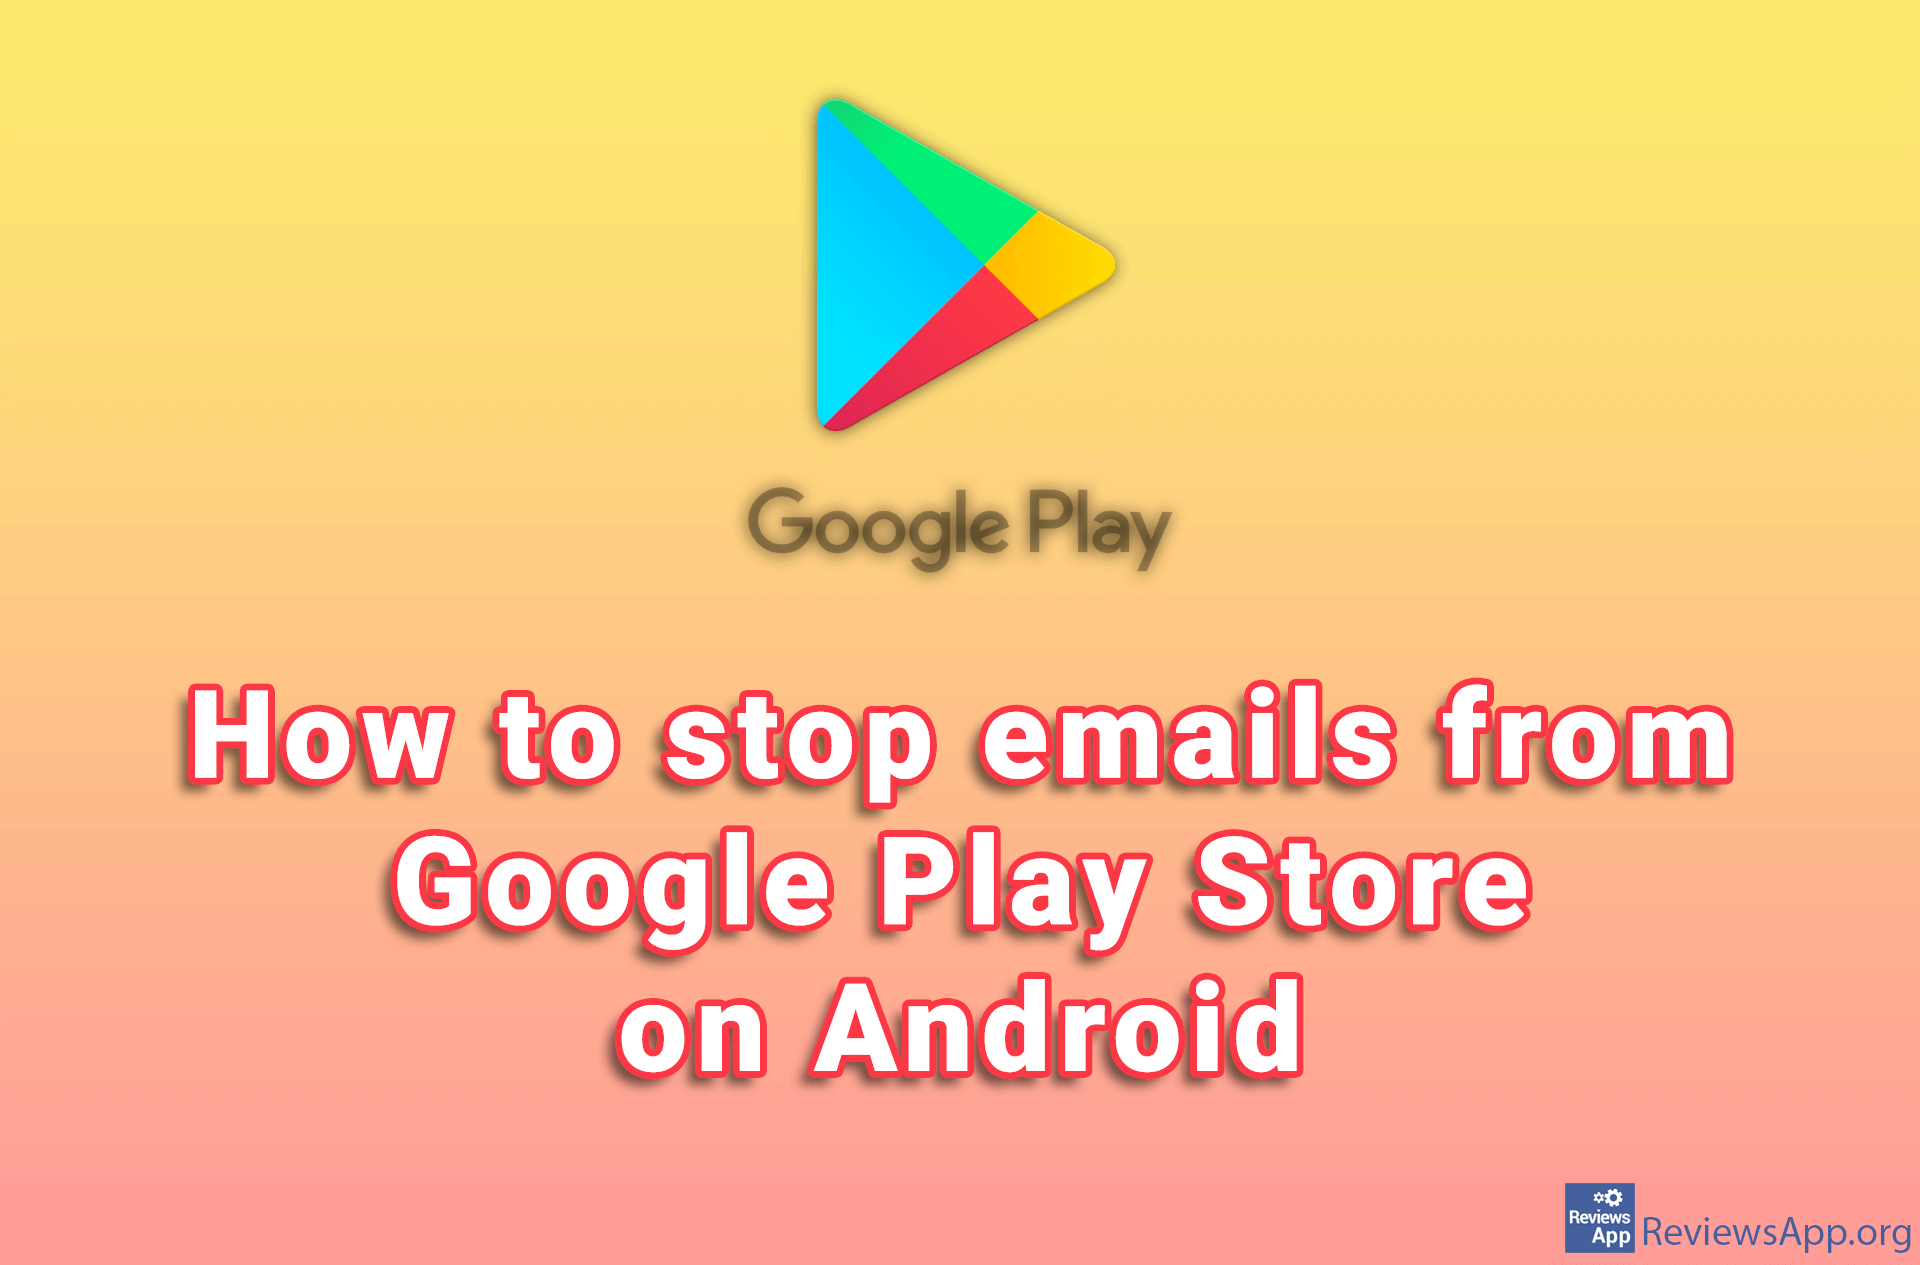 How to stop emails from Google Play Store on Android